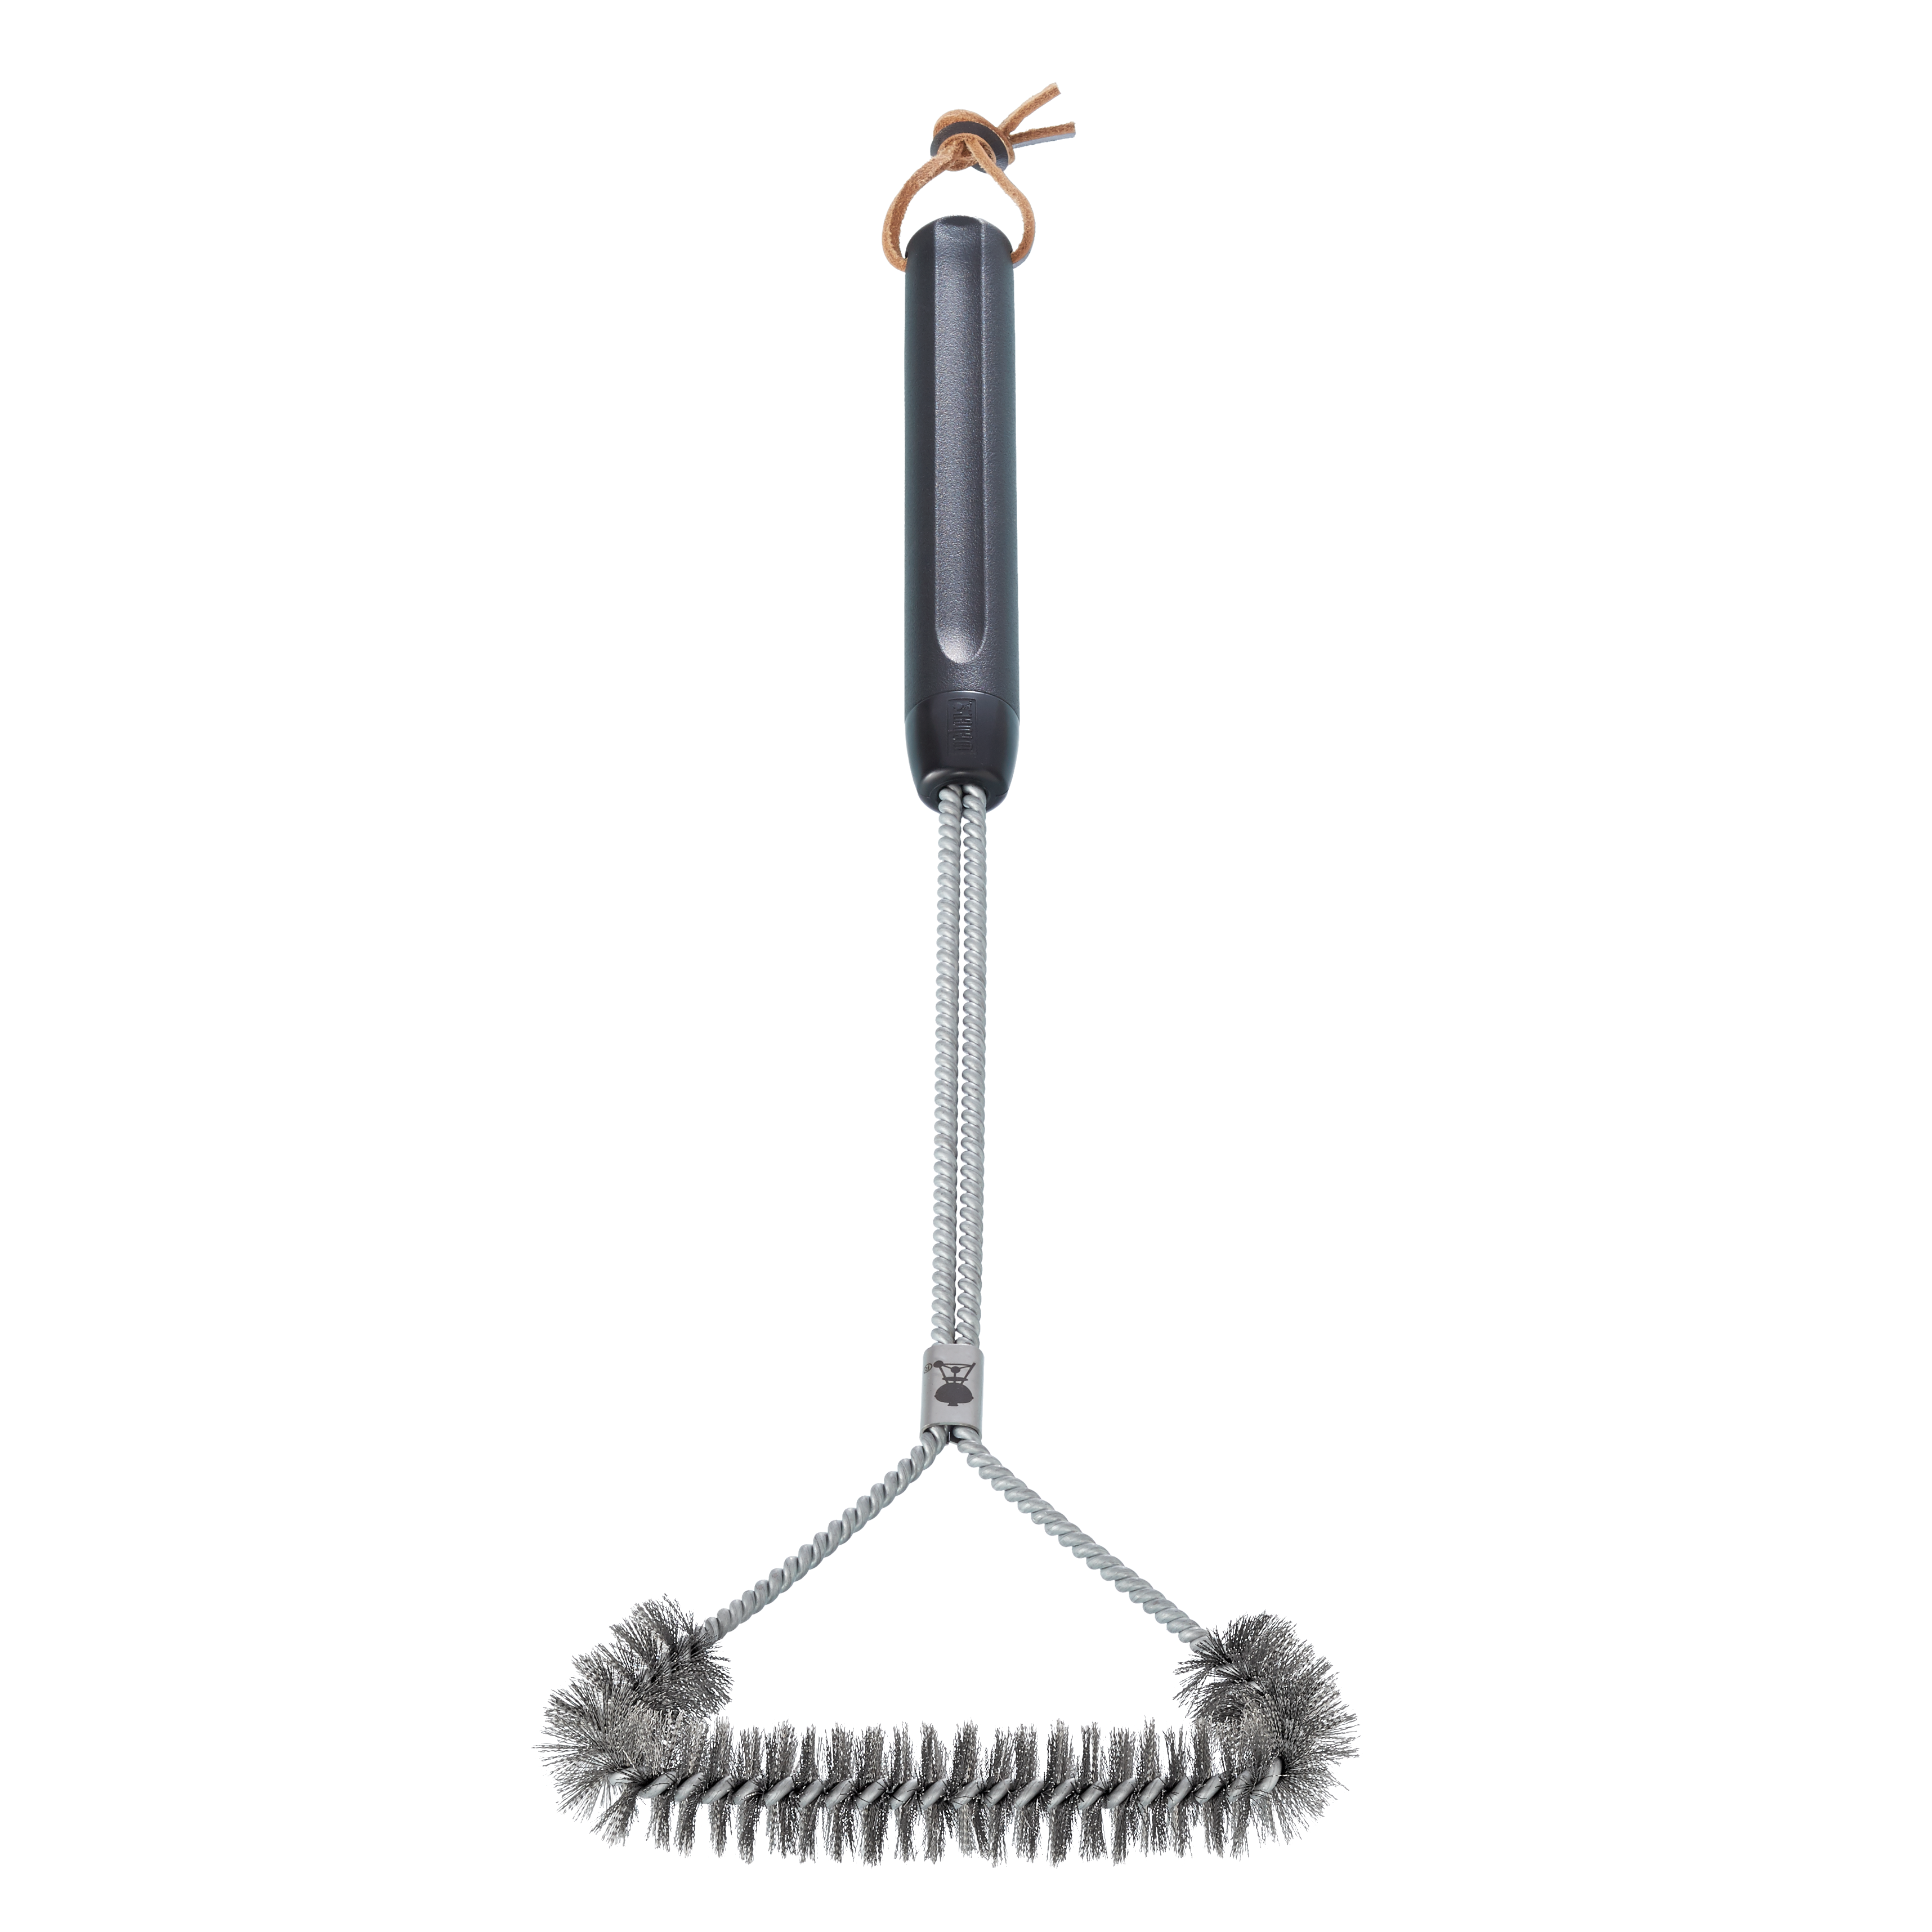 Weber 21 Inch Three-Sided Grill Brush - image 2 of 6